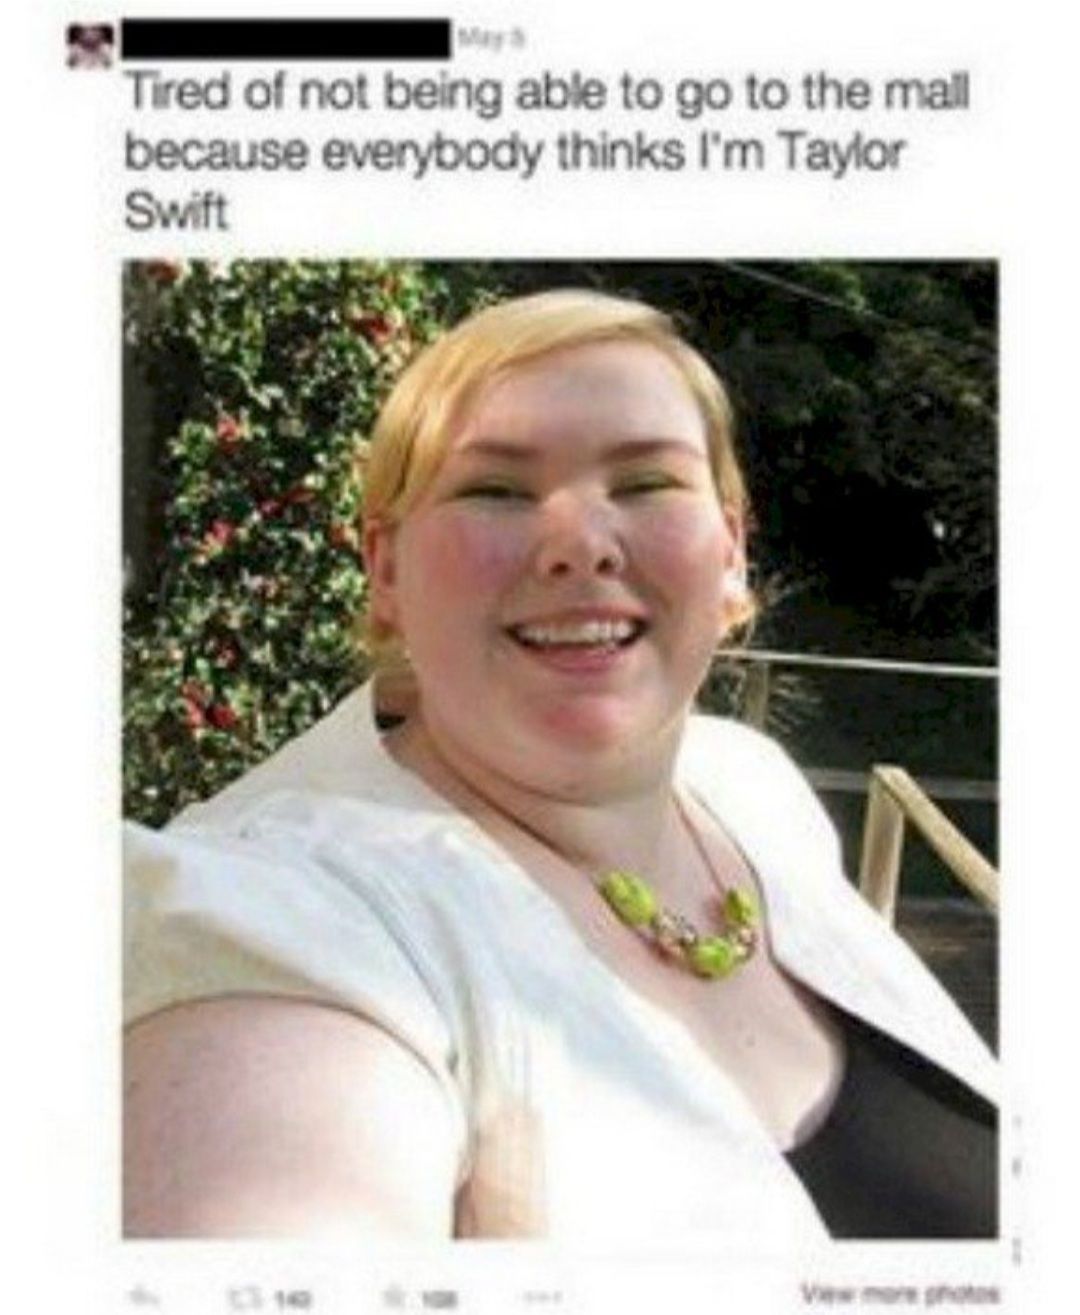 Taylor Swift with high cholesterol - meme